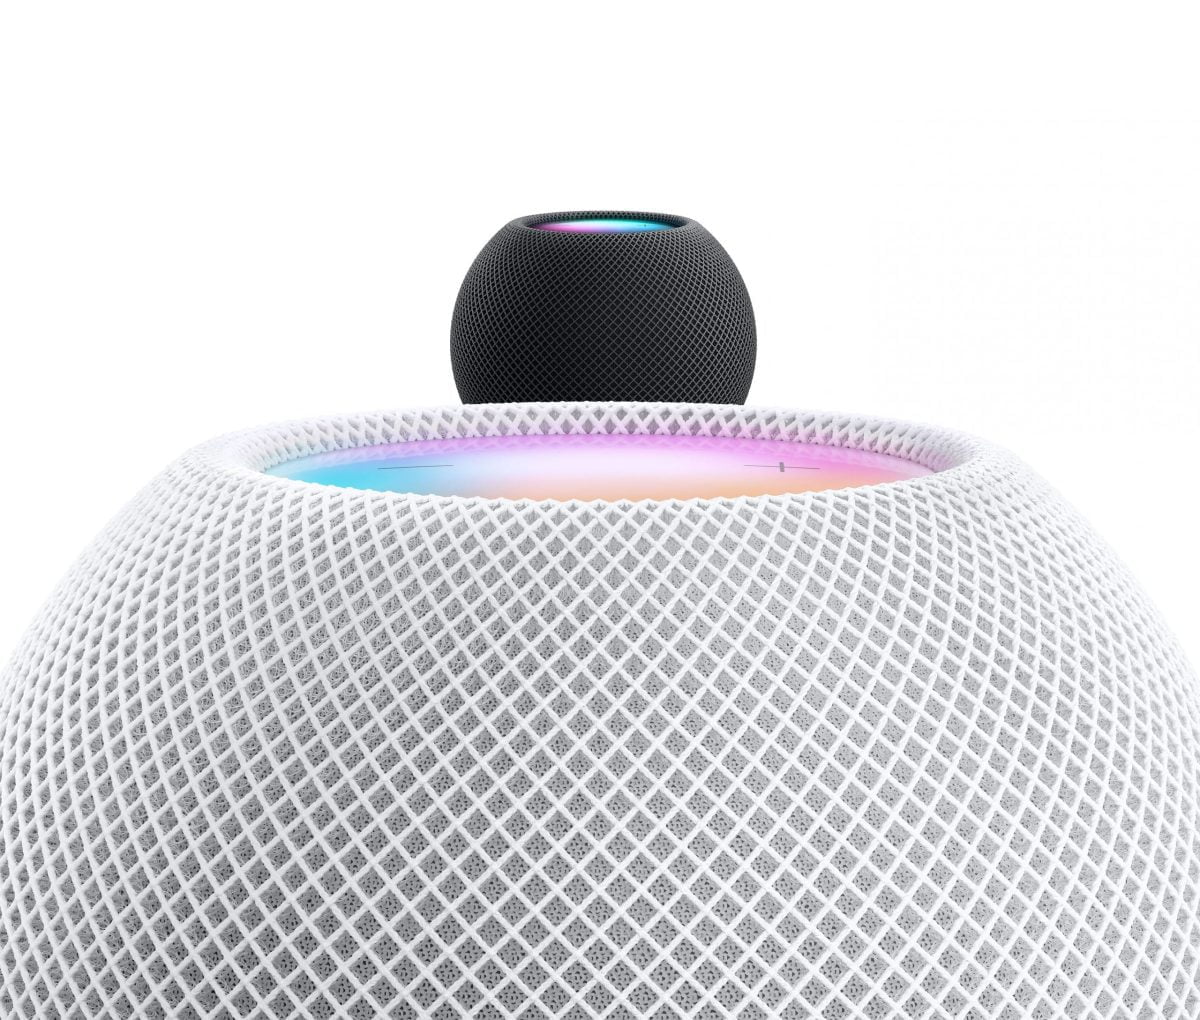 Homepod Mini Gallery 1 Scaled Apple &Lt;H1&Gt;Apple Homepod Mini White&Lt;/H1&Gt; Jam-Packed With Innovation, Homepod Mini Fills The Entire Room With Rich 360-Degree Audio. Place Multiple Speakers Around The House For A Connected Sound System. And With Siri, Your Favorite Do-It-All Intelligent Assistant Helps With Everyday Tasks And Controls Your Smart Home Privately And Securely. &Lt;H2&Gt;Features:&Lt;/H2&Gt; - Fills The Entire Room With Rich 360-Degree Audio - Siri Is Your Do-It-All Intelligent Assistant, Helping With Everyday Tasks - Easily Control Your Smart Home - Designed To Keep Your Data Private And Secure - Place Multiple Homepod Mini Speakers Around The House For A Connected Sound System² - Intercom Messages To Every Room³ - Pair Two Homepod Mini Speakers Together For Immersive Stereo Sound - Voice Recognition Gives Each Family Member A Personalized Experience⁴ - Seamlessly Hand-Off Audio By Bringing Your Iphone Close To Homepod Setup Requires Wi-Fi And Iphone, Ipad, Or Ipod Touch With The Latest Software. &Lt;Pre&Gt;One Year International Apple Warranty&Lt;/Pre&Gt; Homepod Mini Apple Homepod Mini White